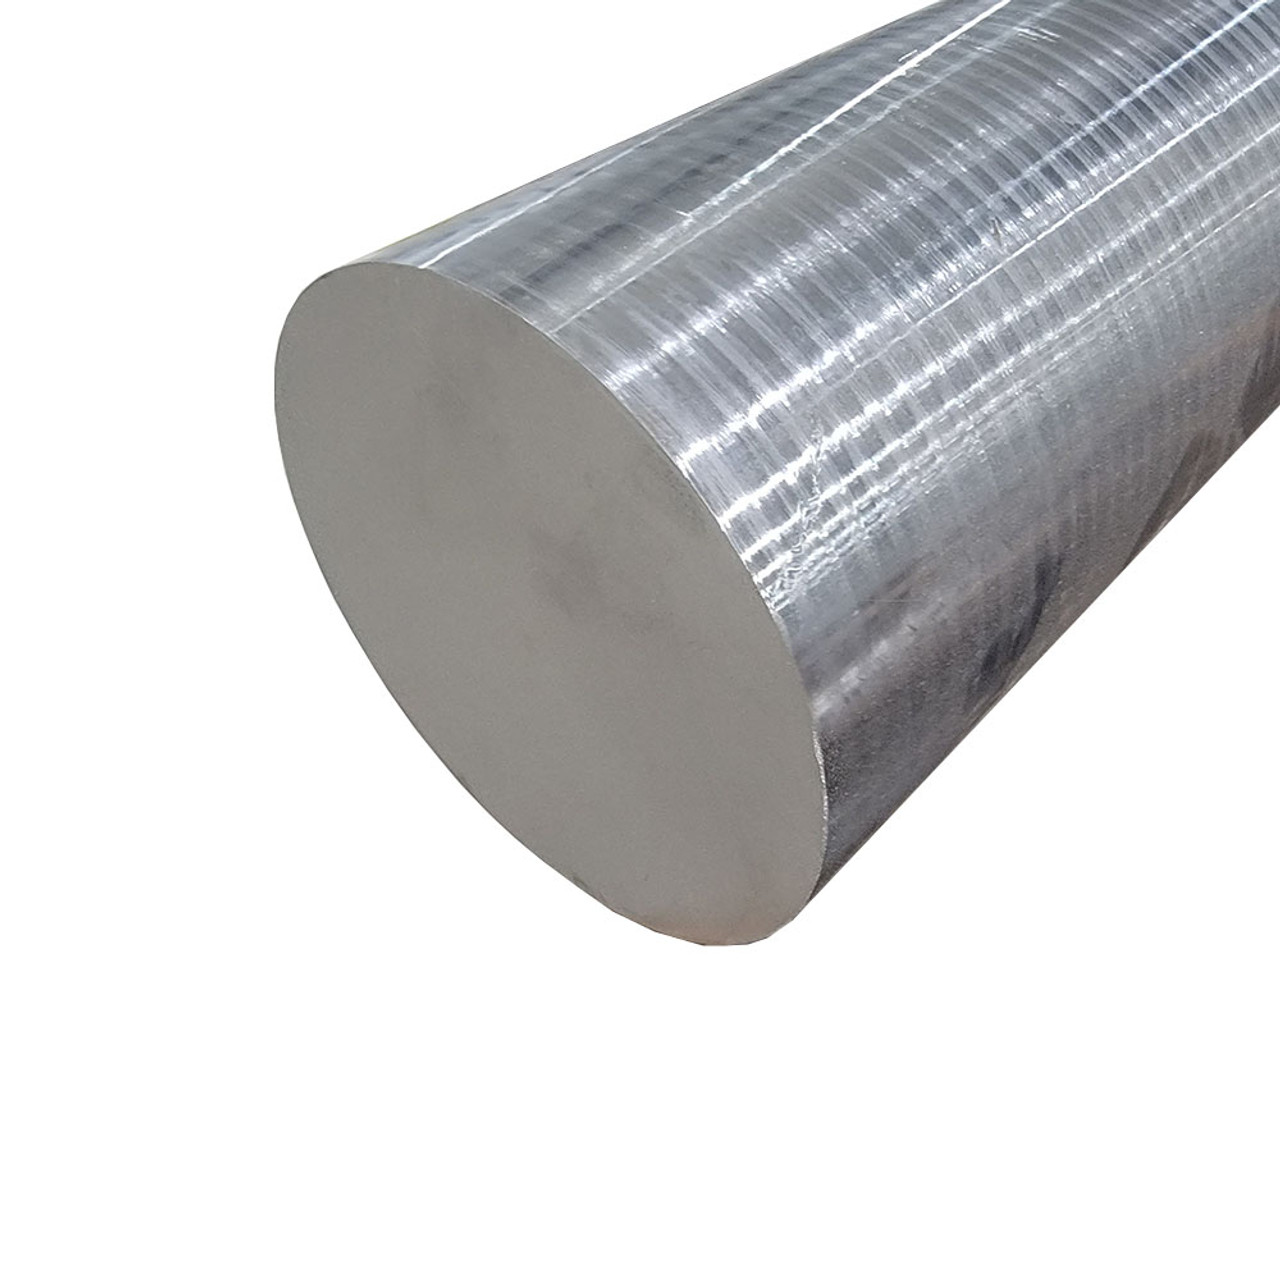 4.500 (4-1/2 inch) x 10 inches, 2205 Stainless Steel Round Rod, Rough Turned